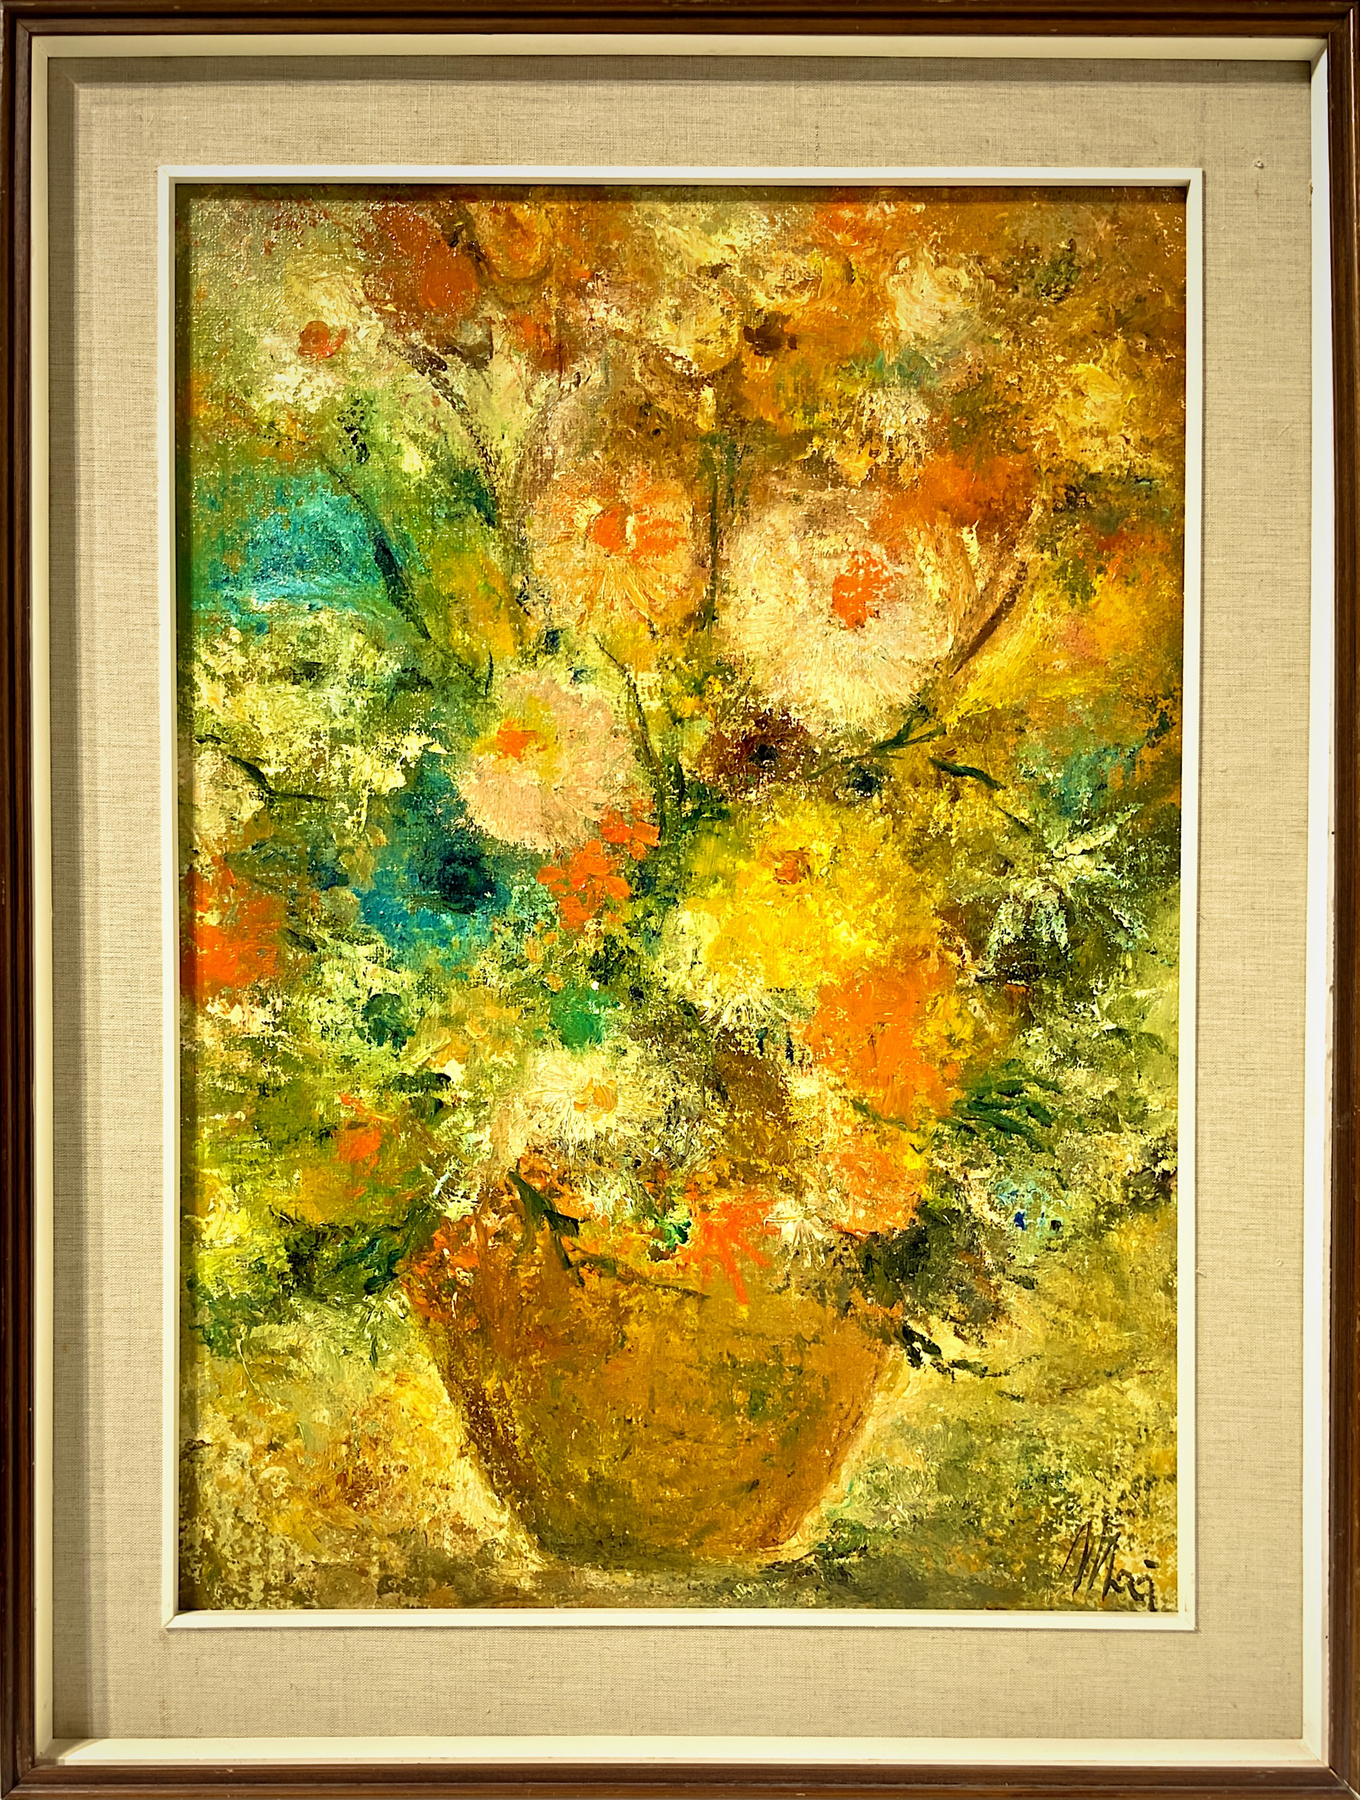 Oil painting on canvas depicting vase with flowers, signed Mai. Cm 70x50 - Image 2 of 4